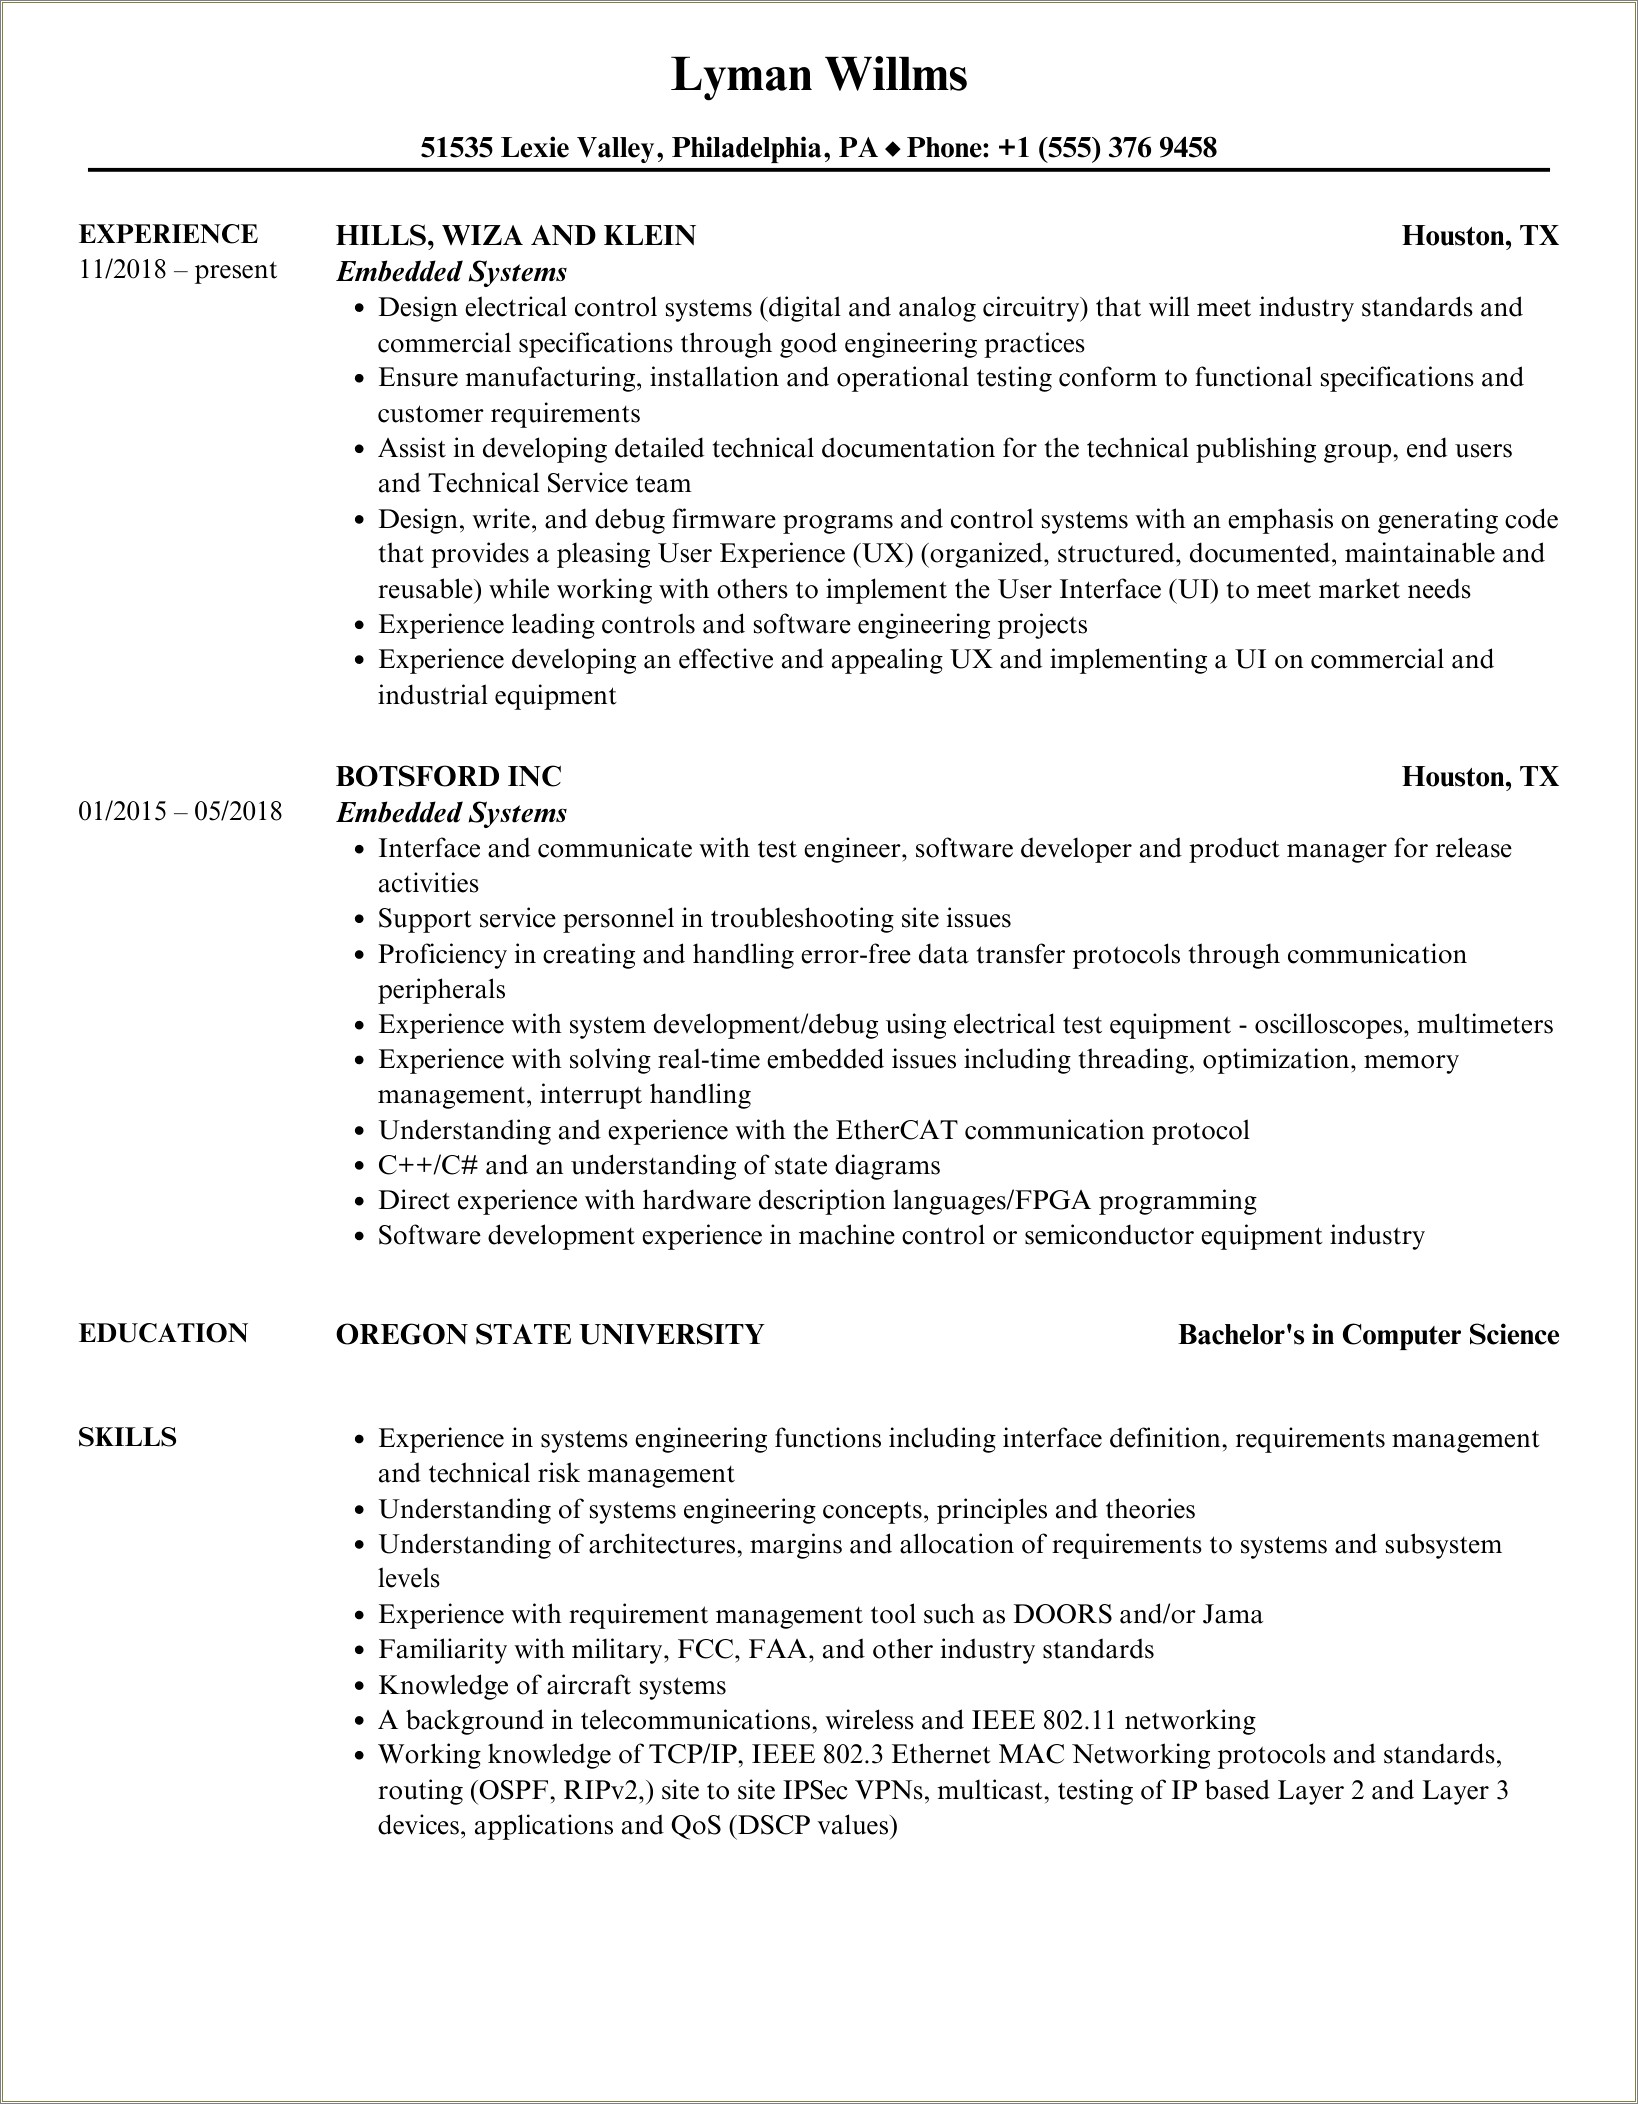 Embedded Systems Resume For 2 Year Experience